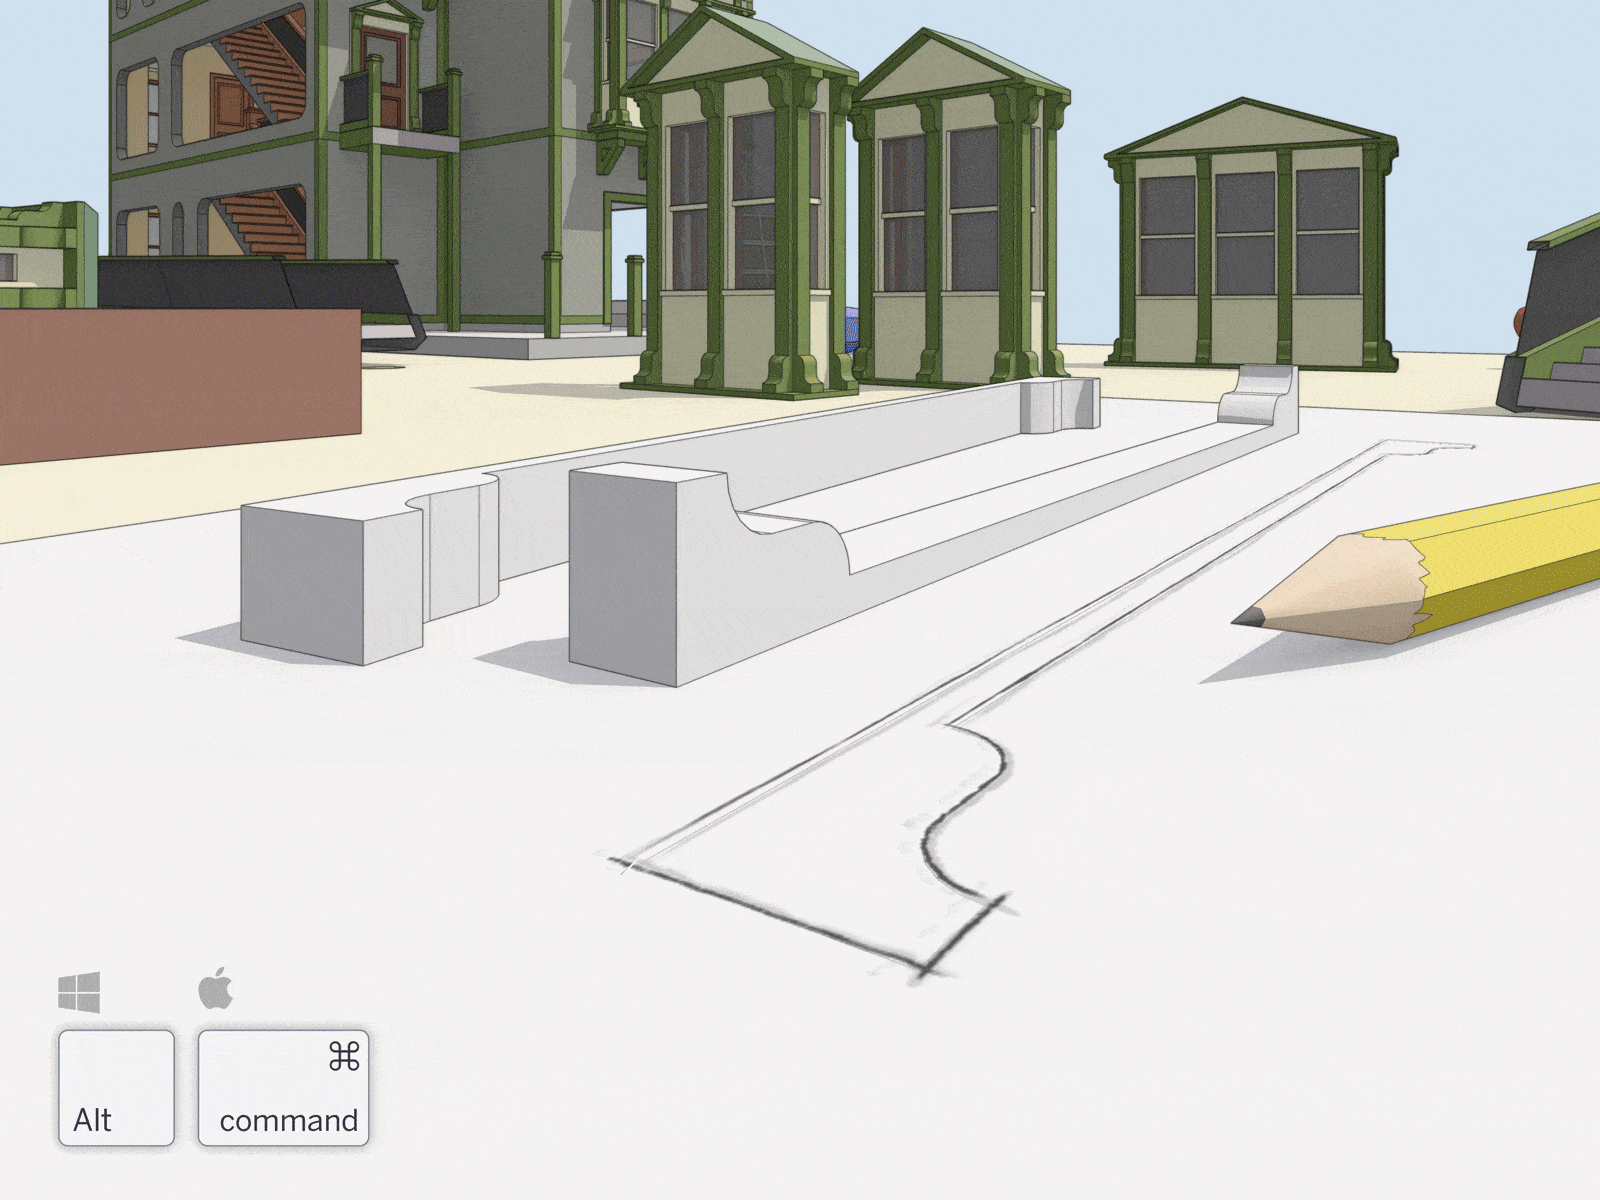 SketchUp Guide How to Export an Optimized Image From SketchUp  Architizer  Journal